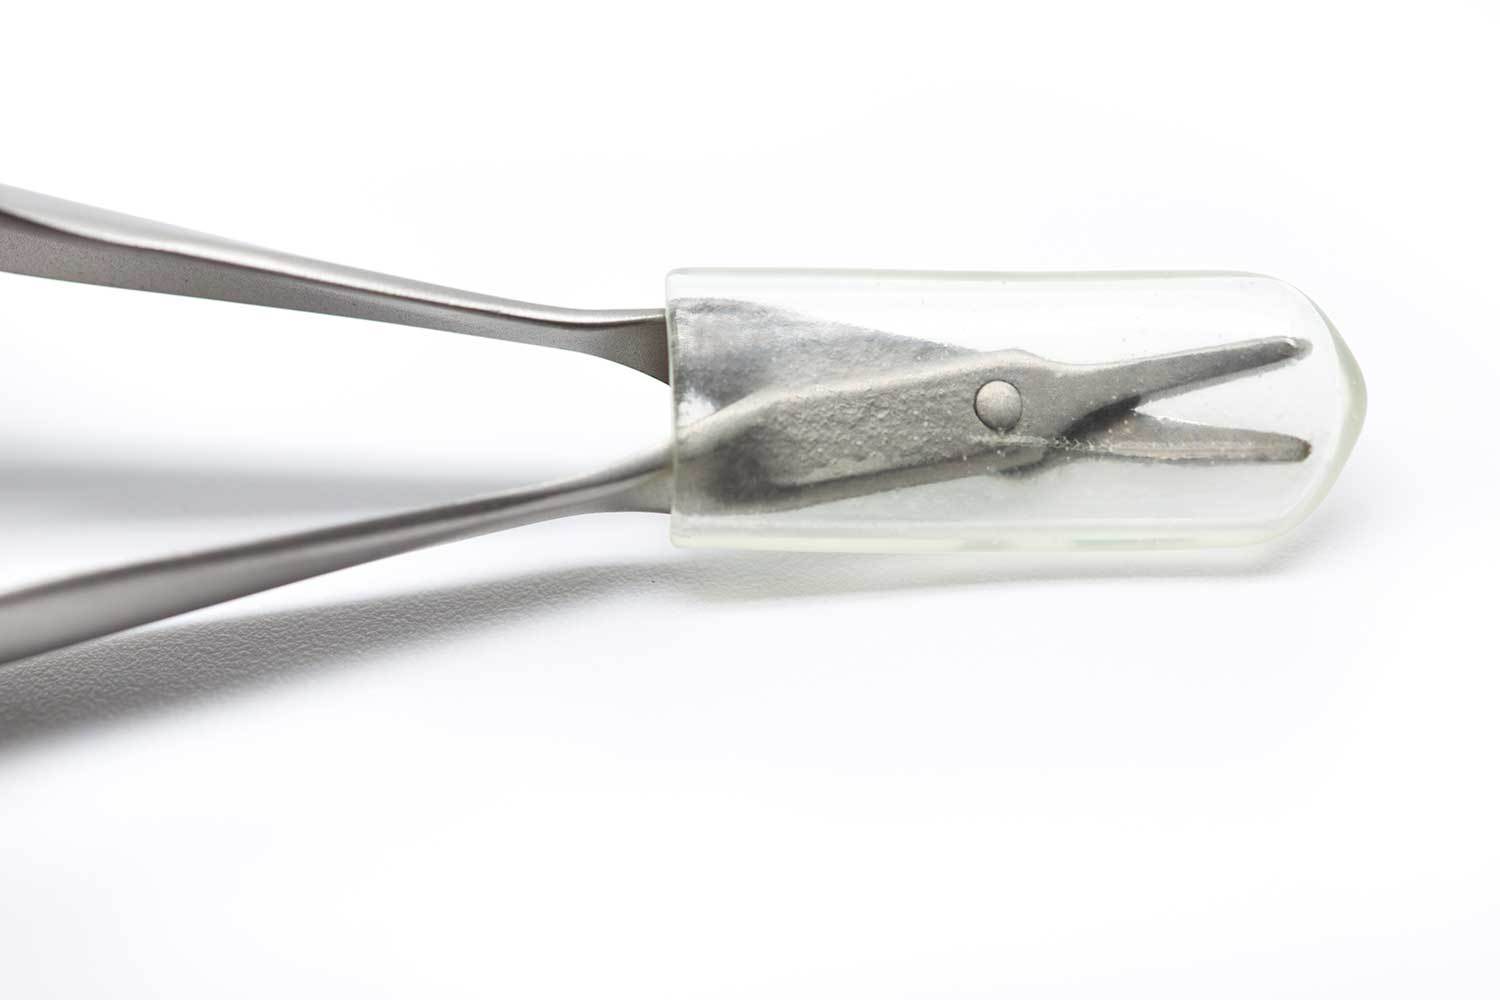 Laschal Micro Surgery Scissor (Soft touch- blunt tip) ProNorth Medical Laschal N-4CXF Suture Cutter with blunt-blunt tips for precise suture removal, 13.5cm length, weighing 12 grams, designed to minimize tissue trauma